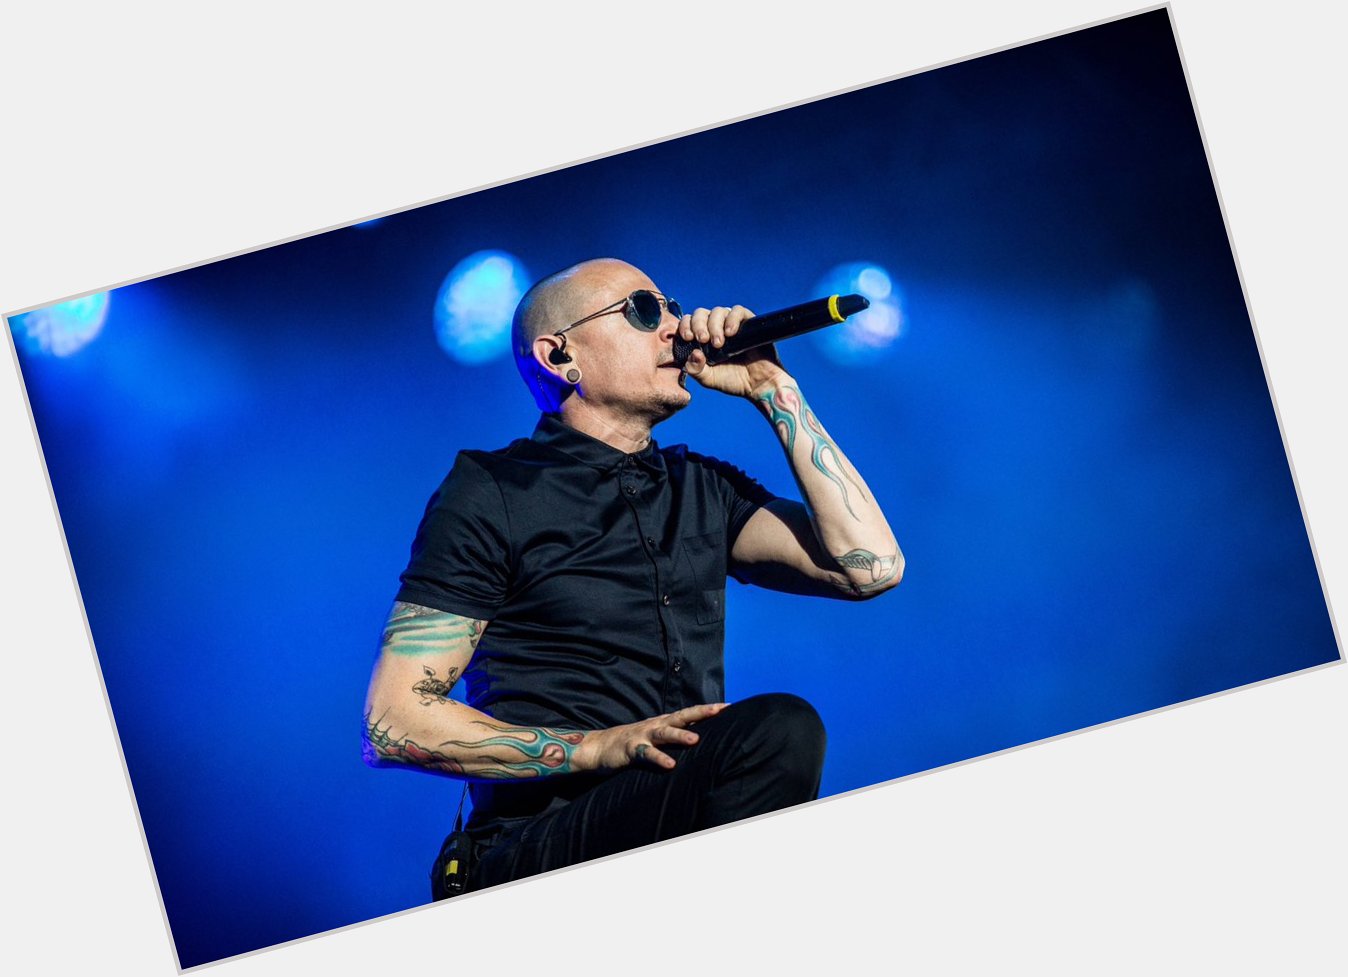 Happy birthday to Chester Bennington, who would have been 46 today, always my favourite singer 